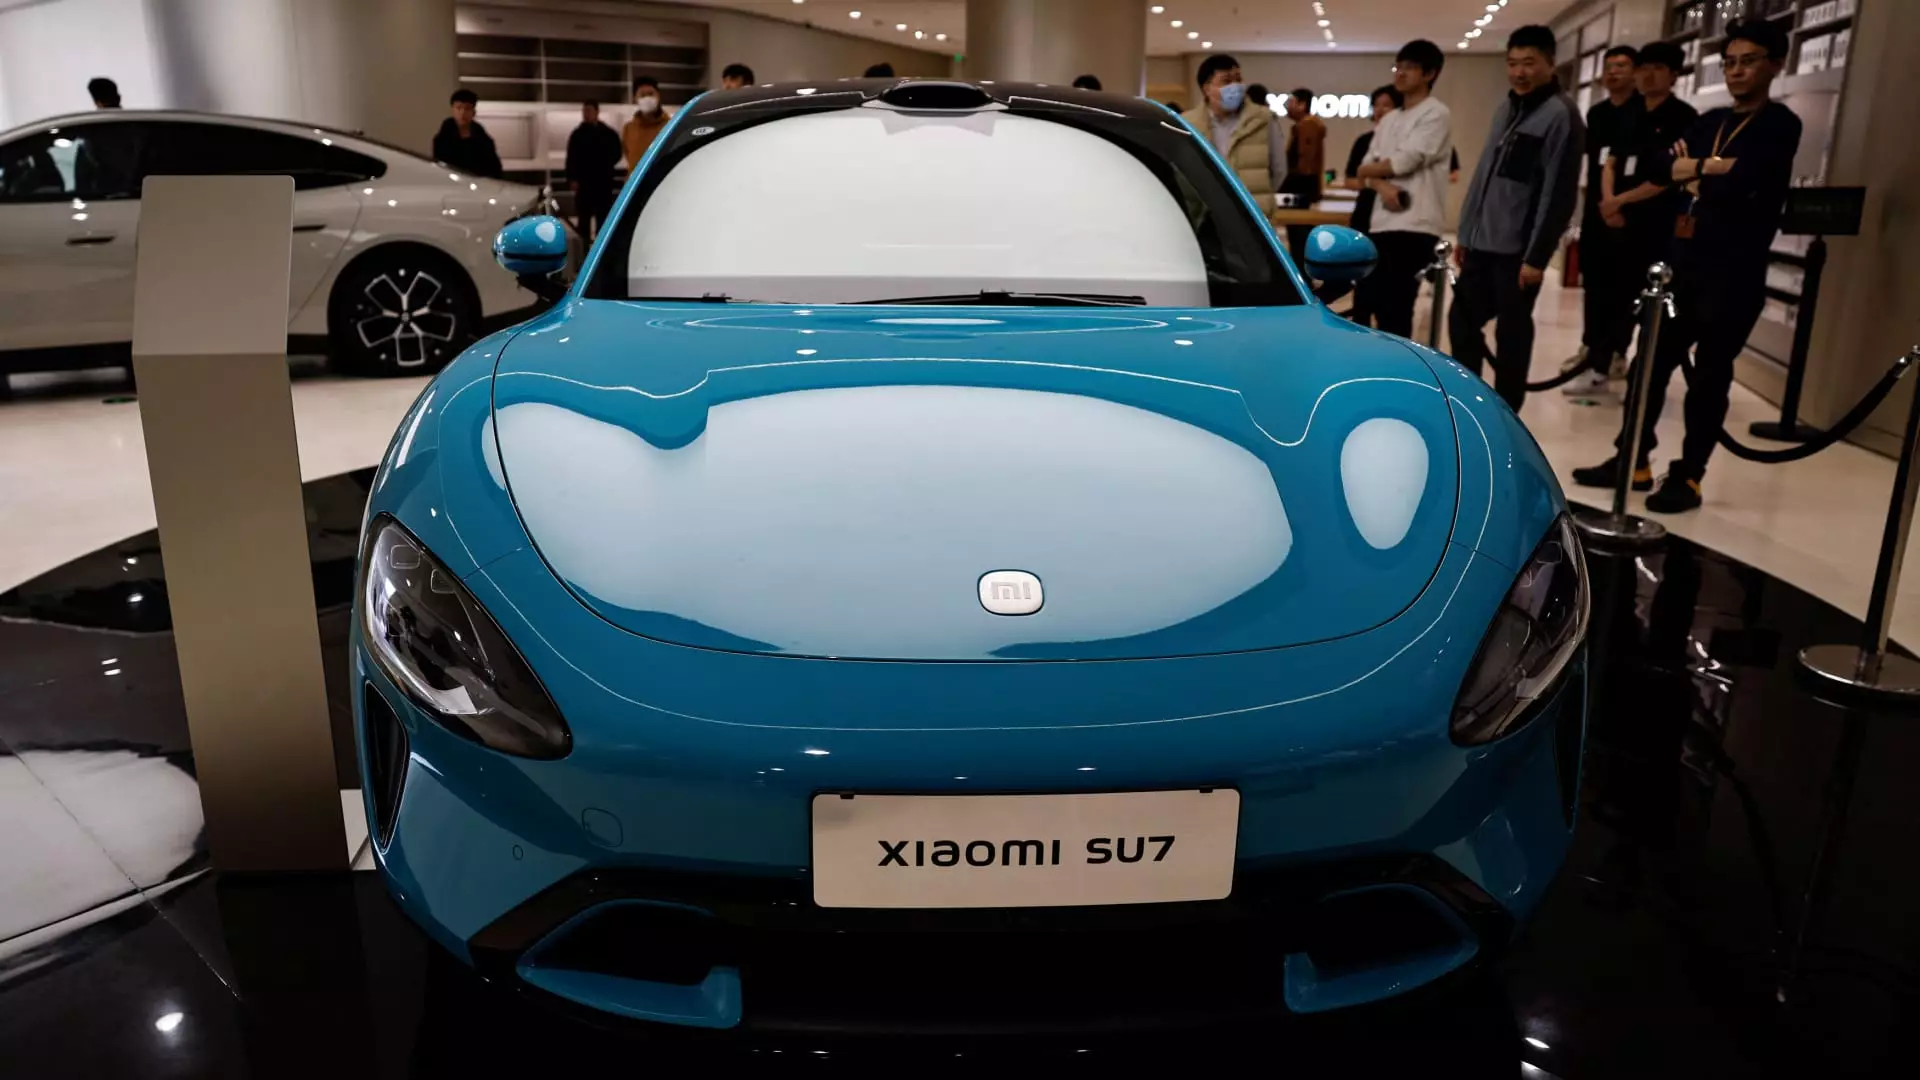 Xiomi: The New Player in the Electric Car Industry